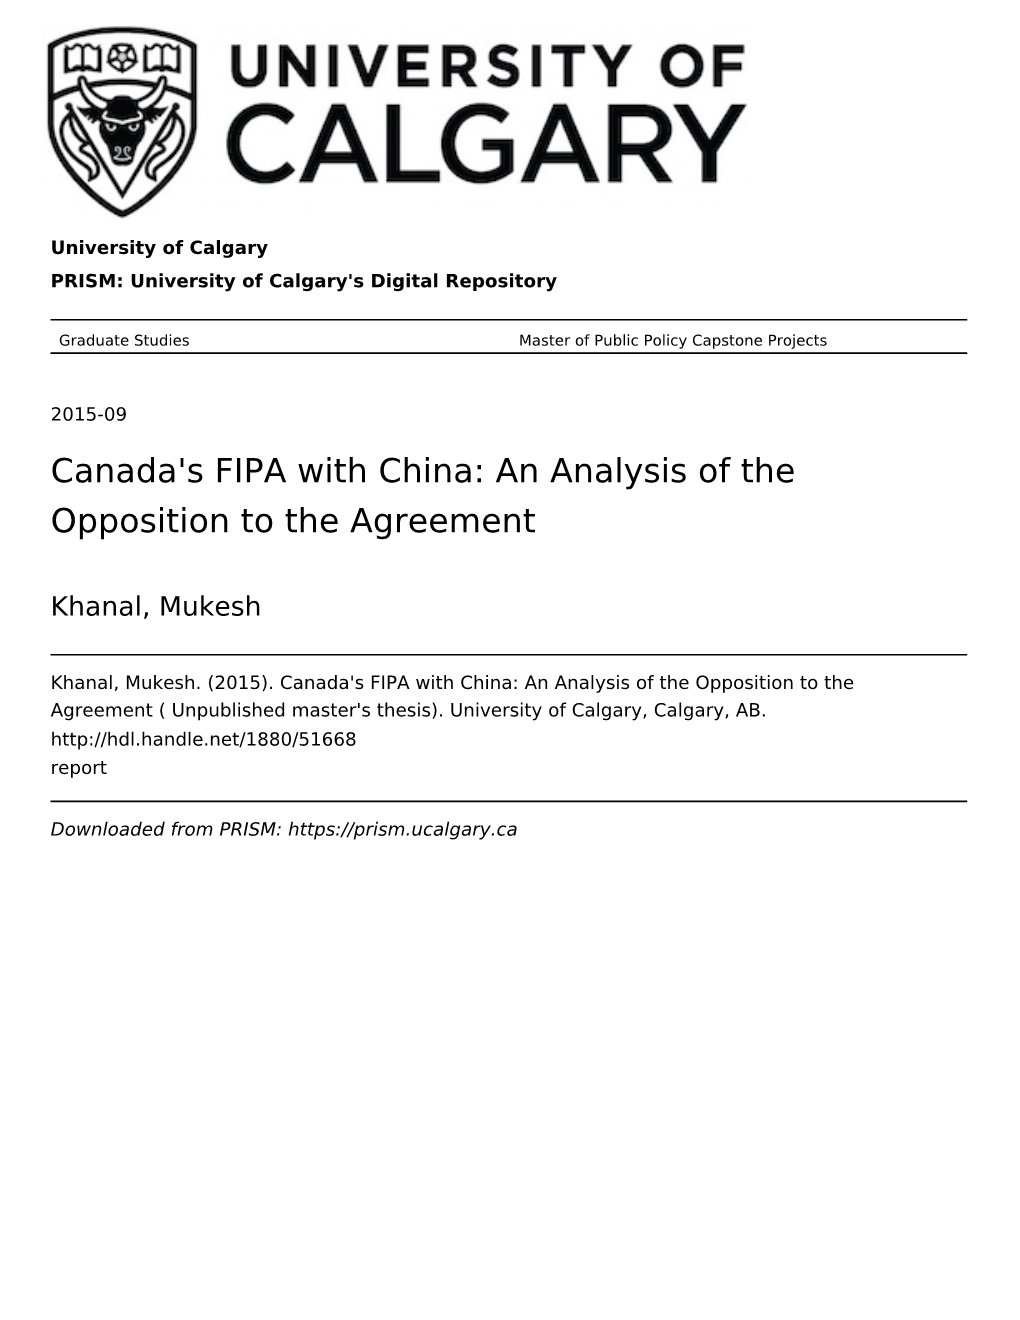 Canada's FIPA with China: an Analysis of the Opposition to the Agreement